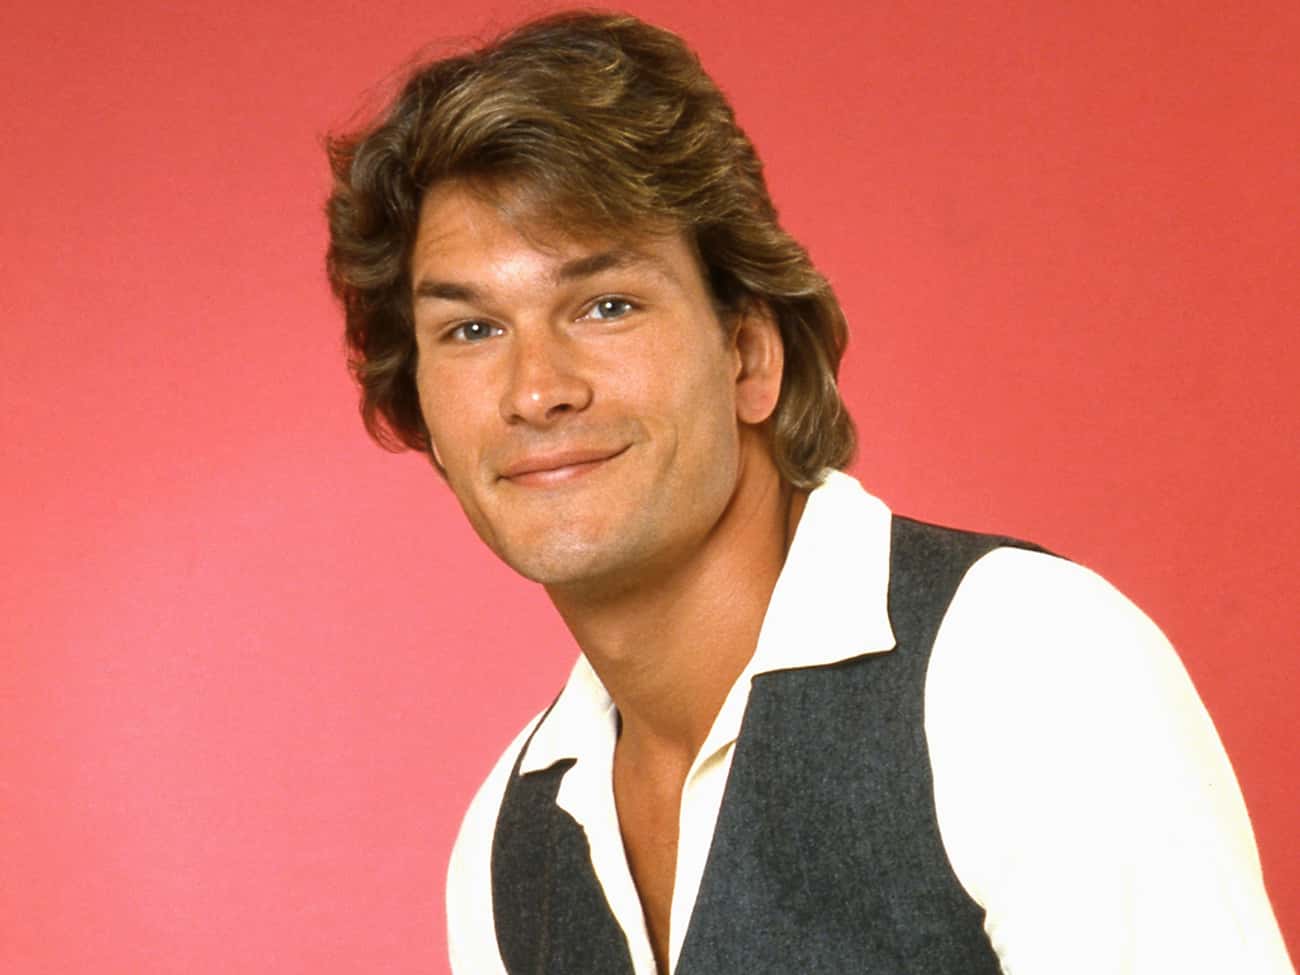 Young Patrick Swayze in White Buttondown with Gray Vest